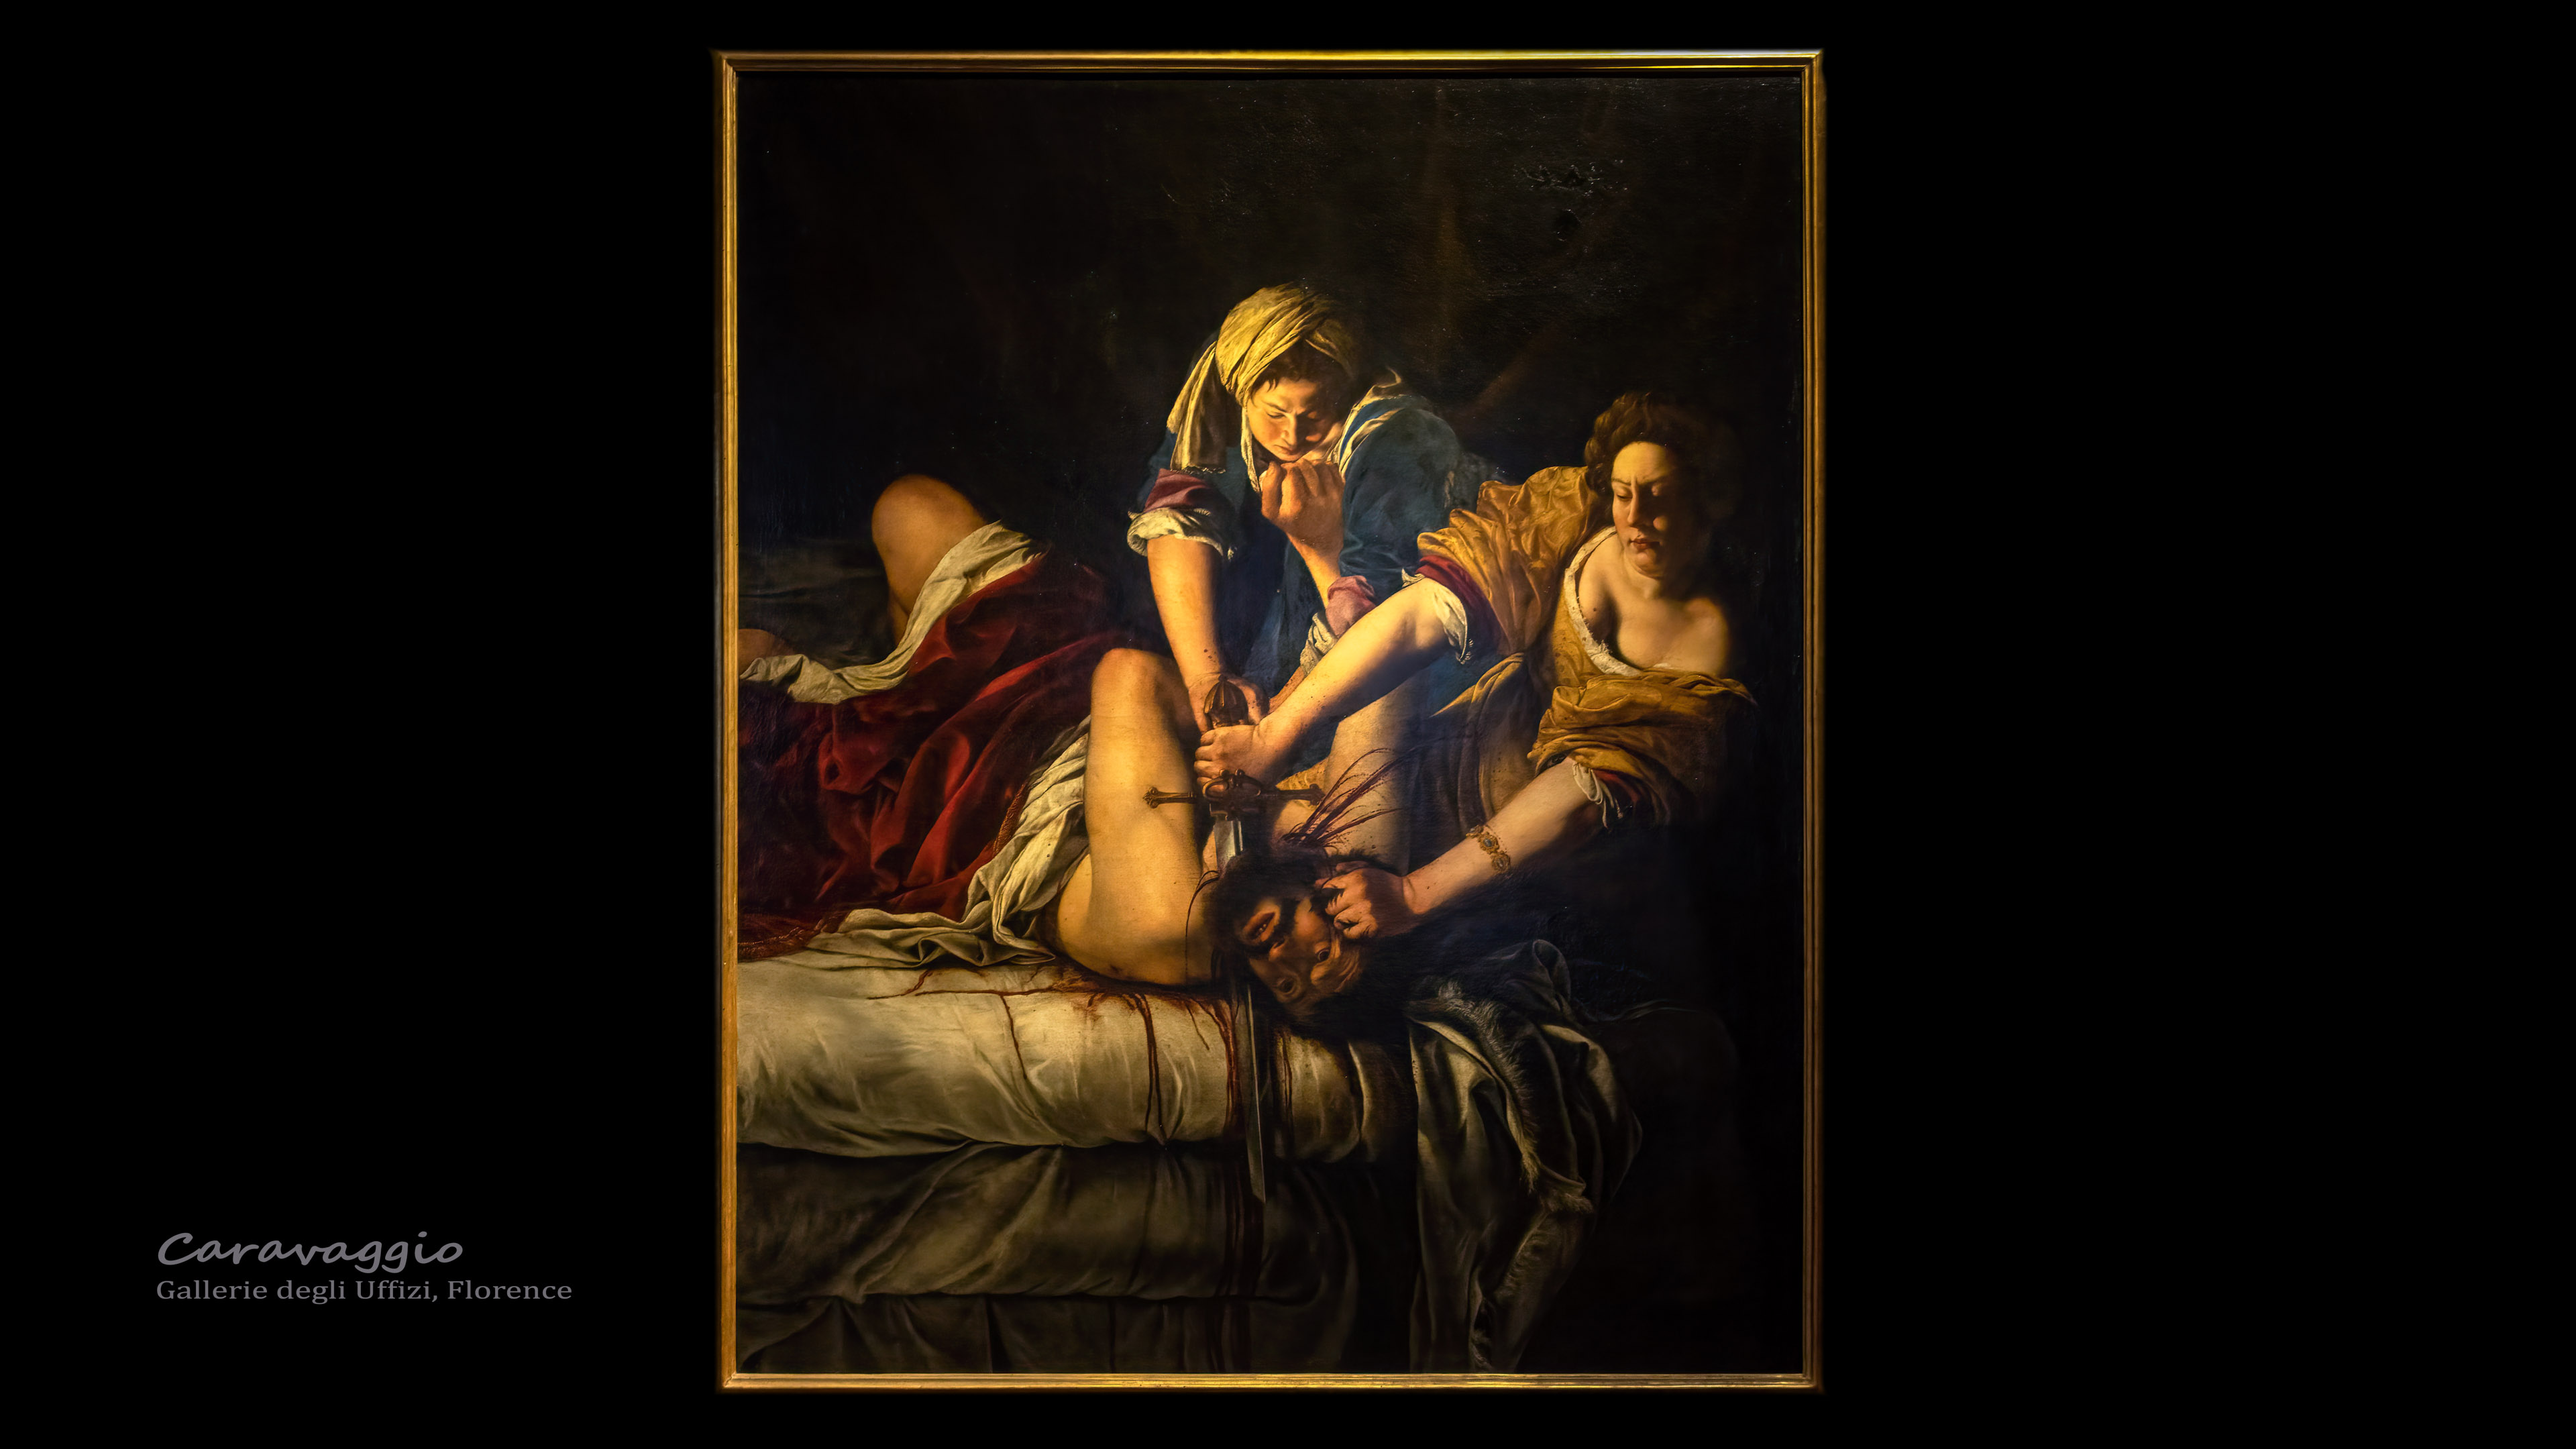 Experience the chiaroscuro brilliance on your PC with our Caravaggio HD wallpaper.